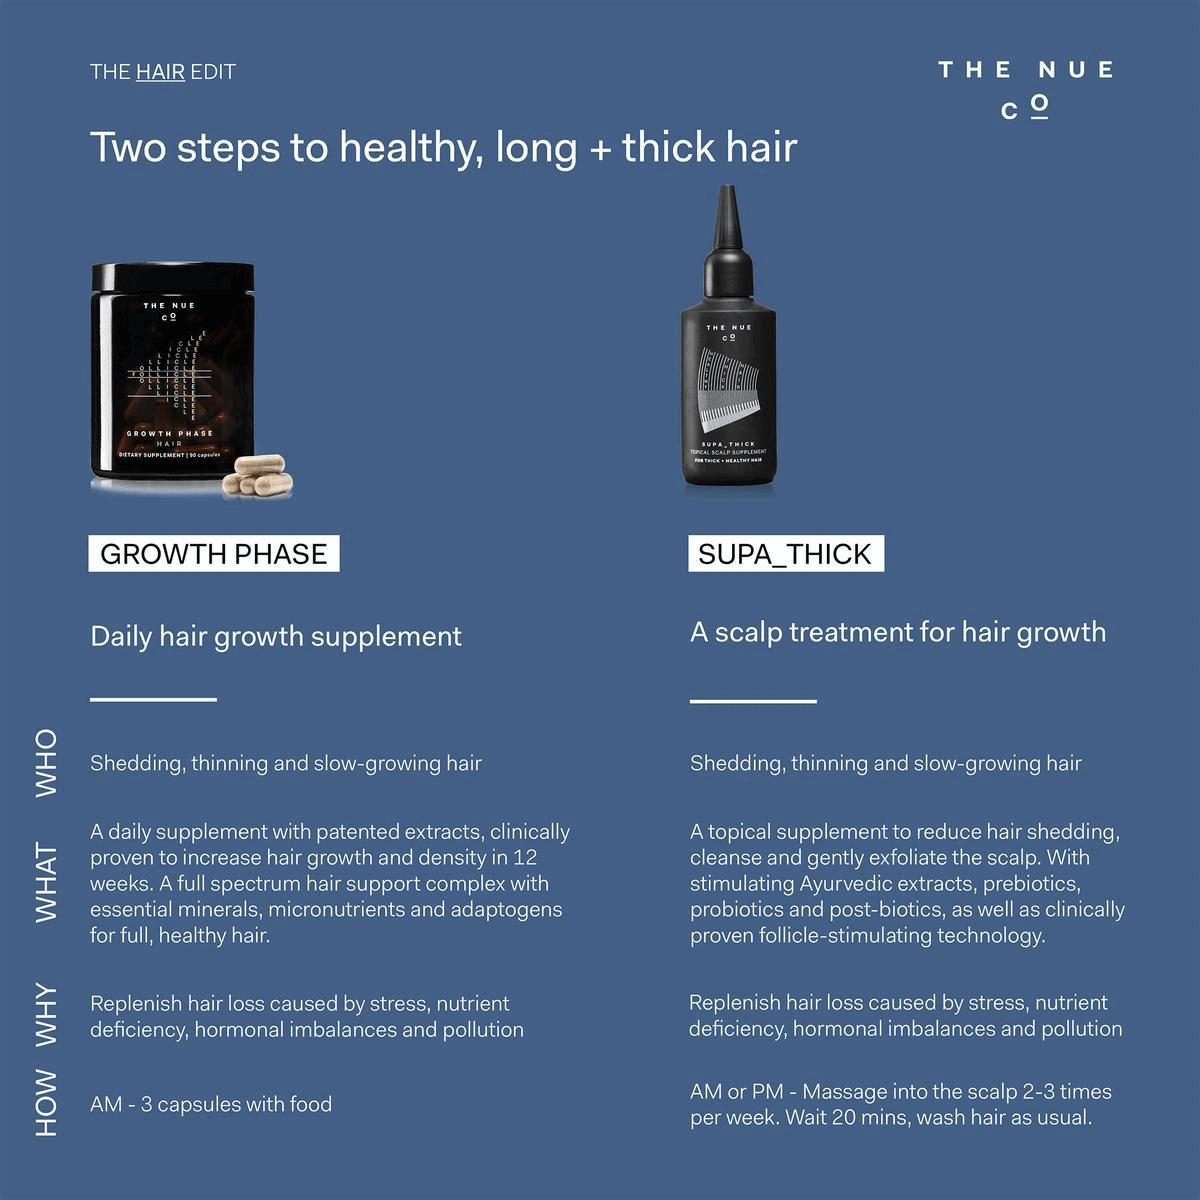 Image 1, difference between growth paste vs supa_thick. Image 2, ingredients and their benefits.